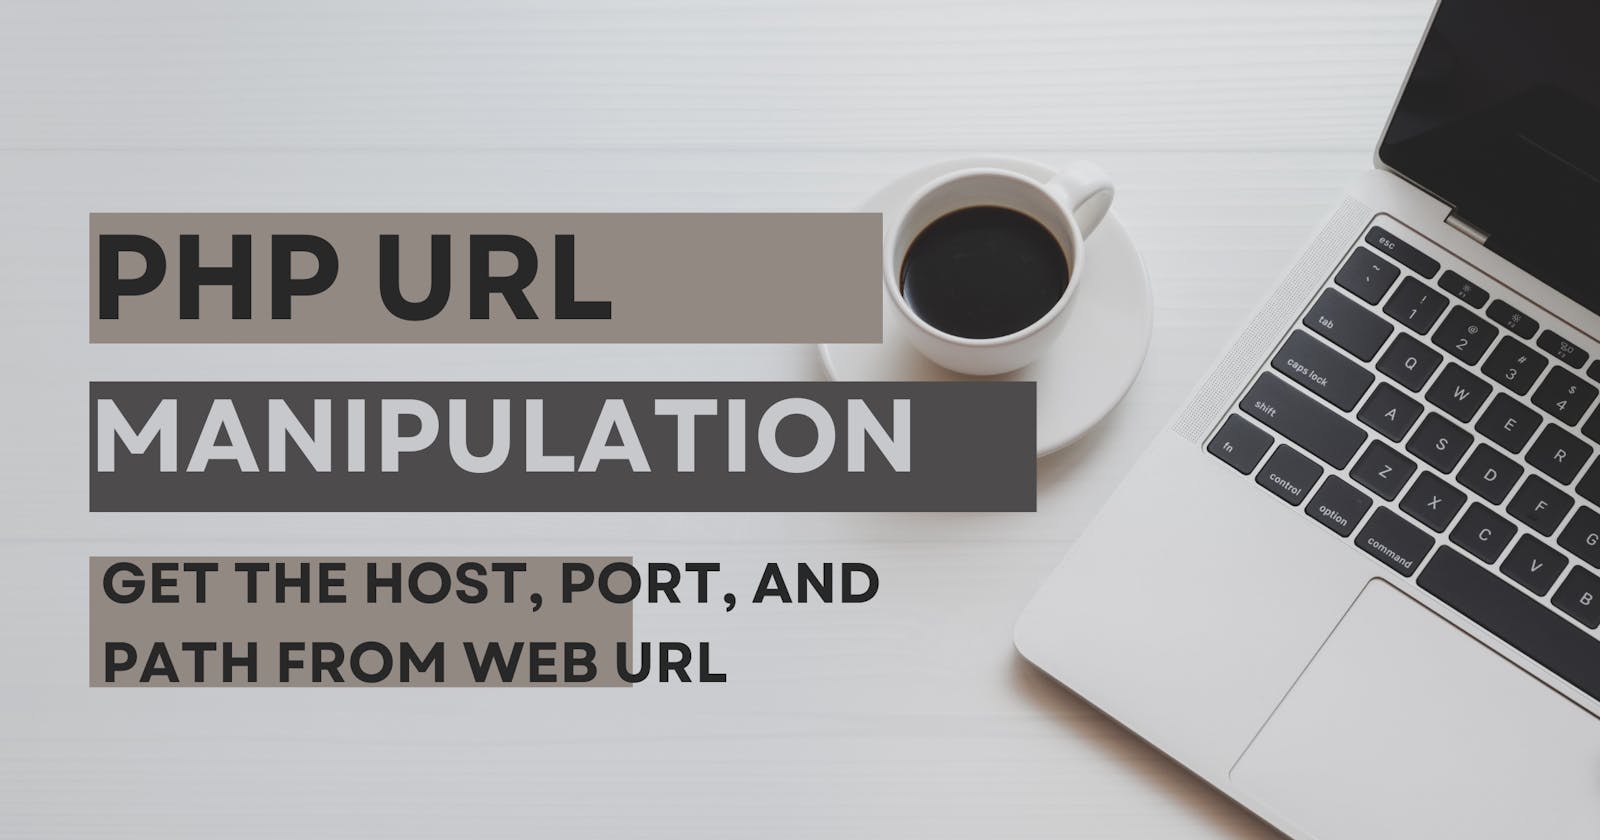 How to get the scheme, host, port, and path from a complete URL using PHP?